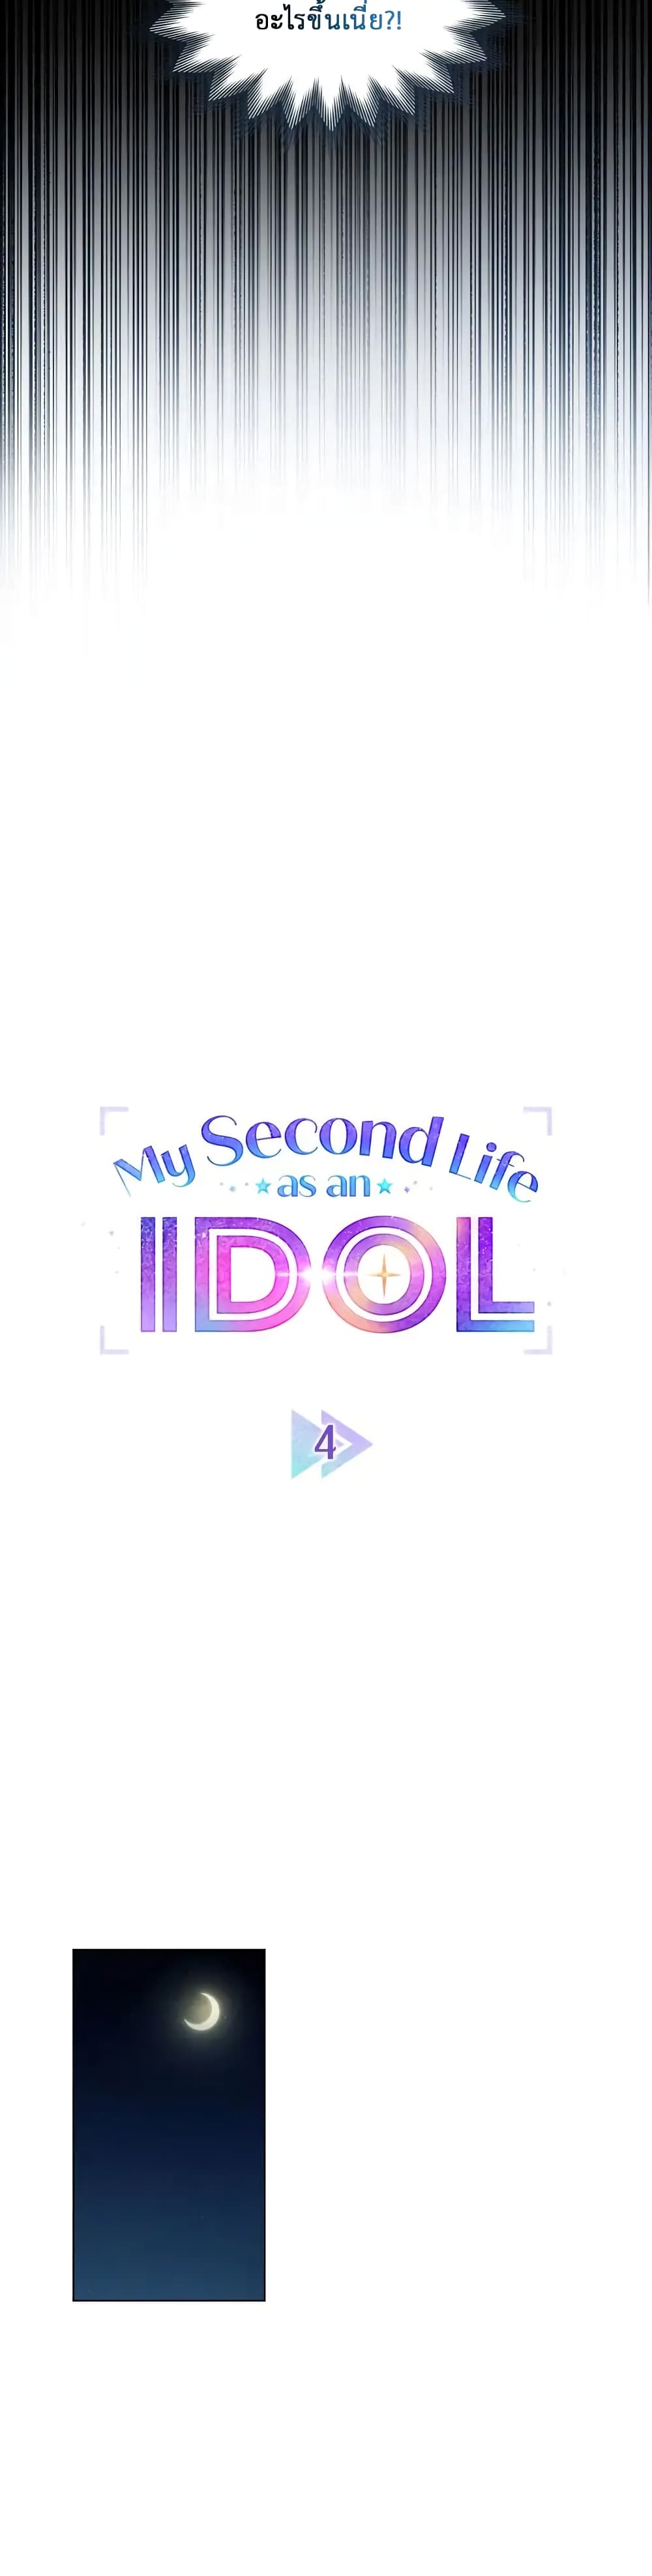 My Second Life as an Idol 4-4